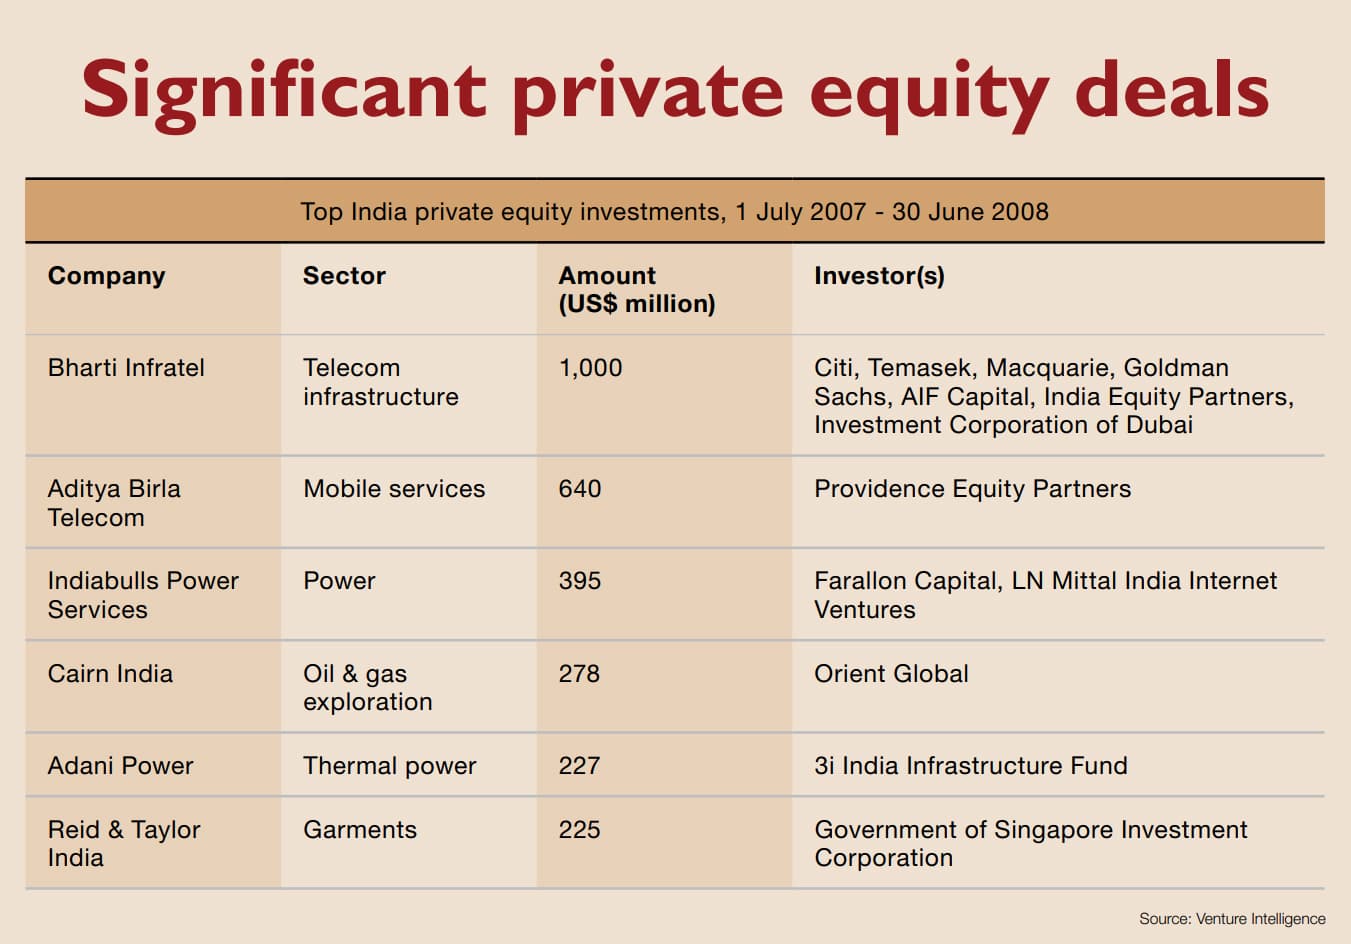 Significant private equity deals